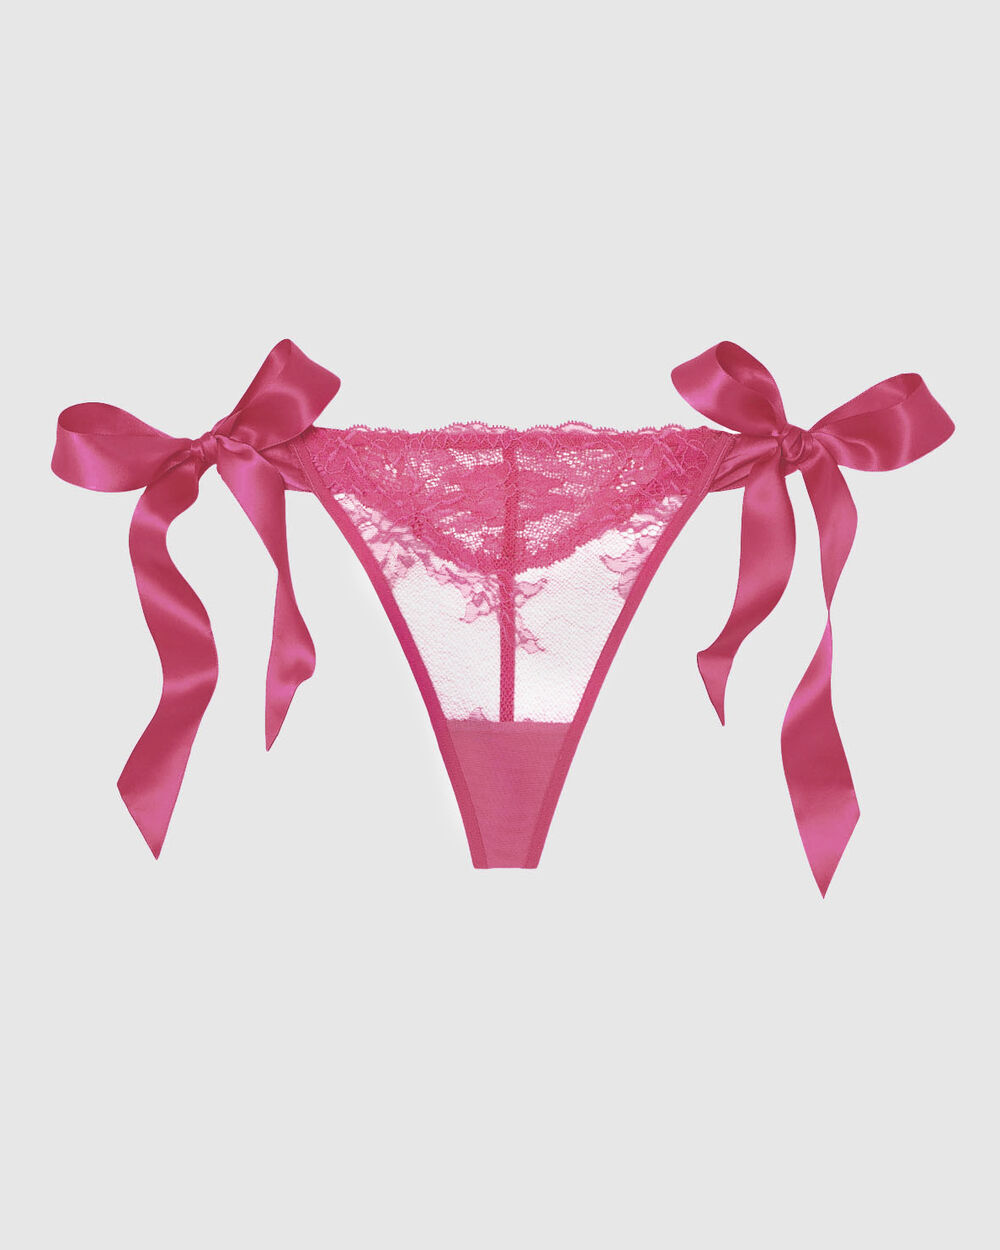 Entice Pink Lace Diamante Tanga Knickers, Lingerie